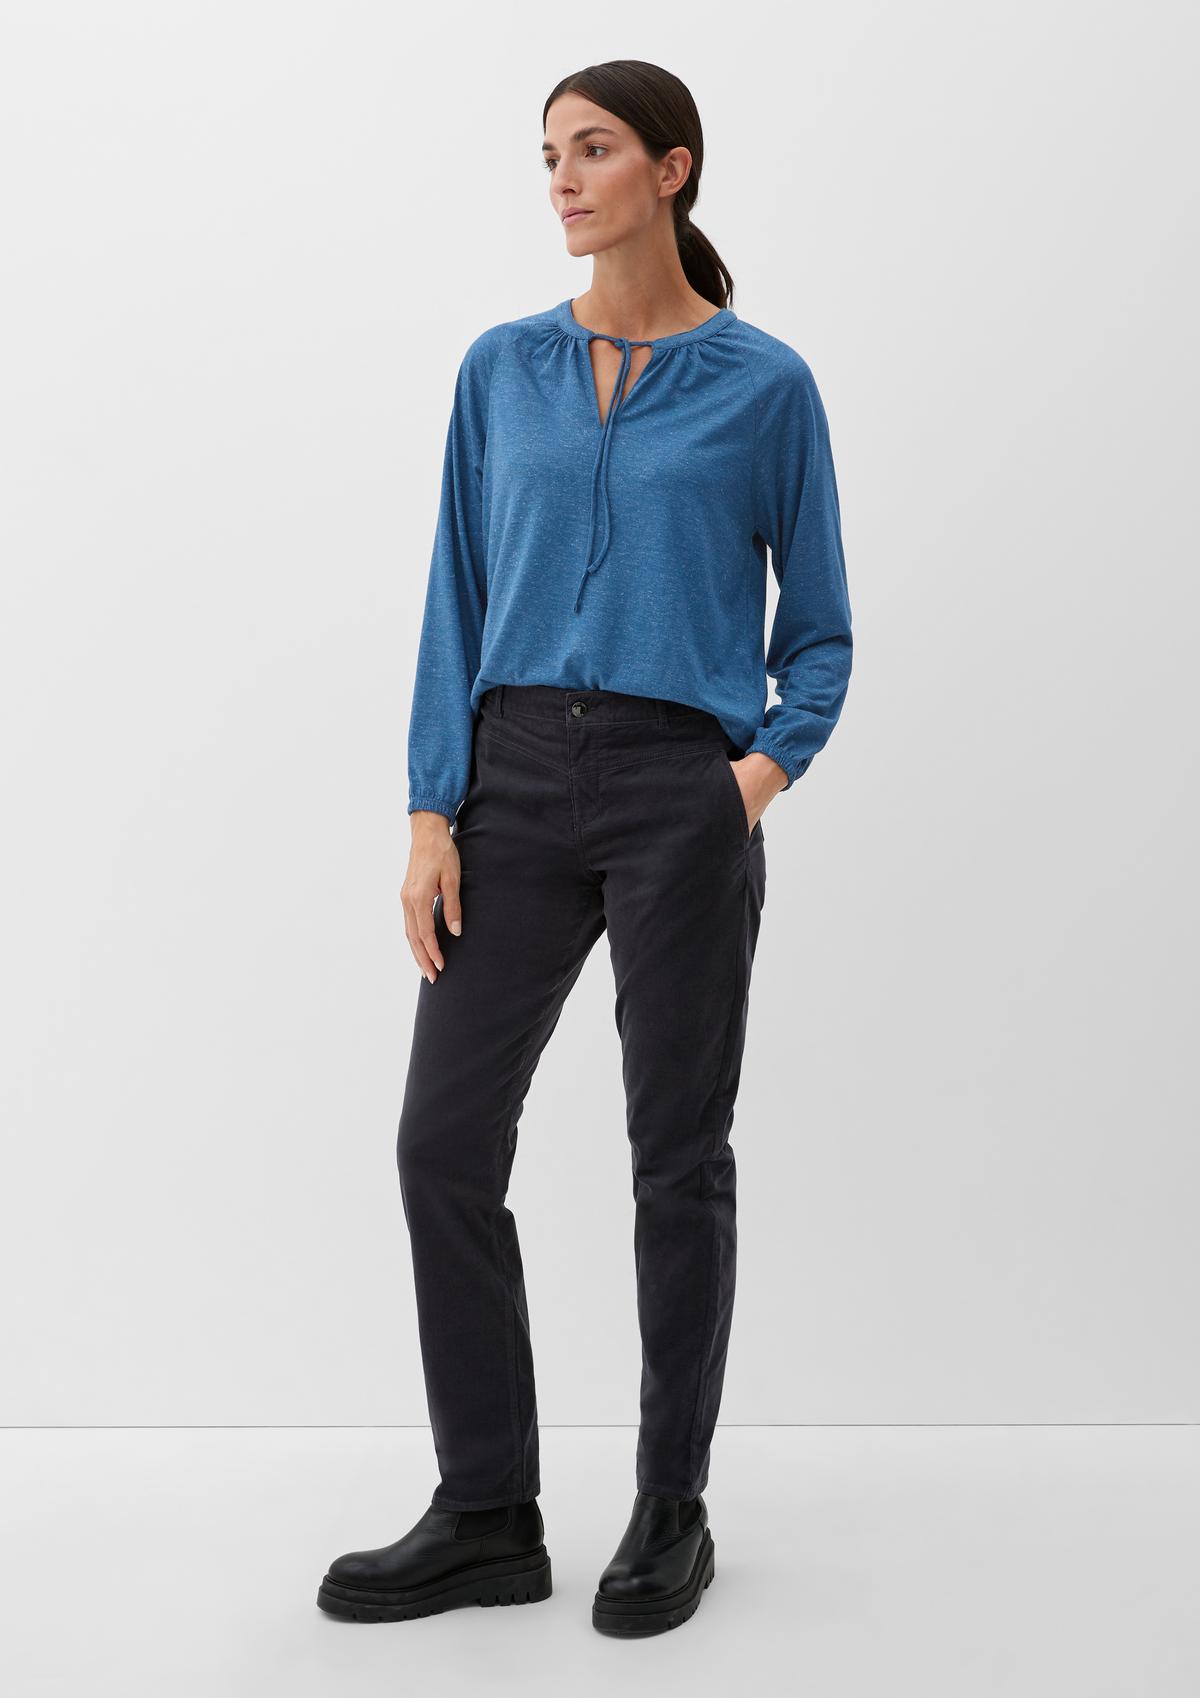 s.Oliver Blouse top with glittery details